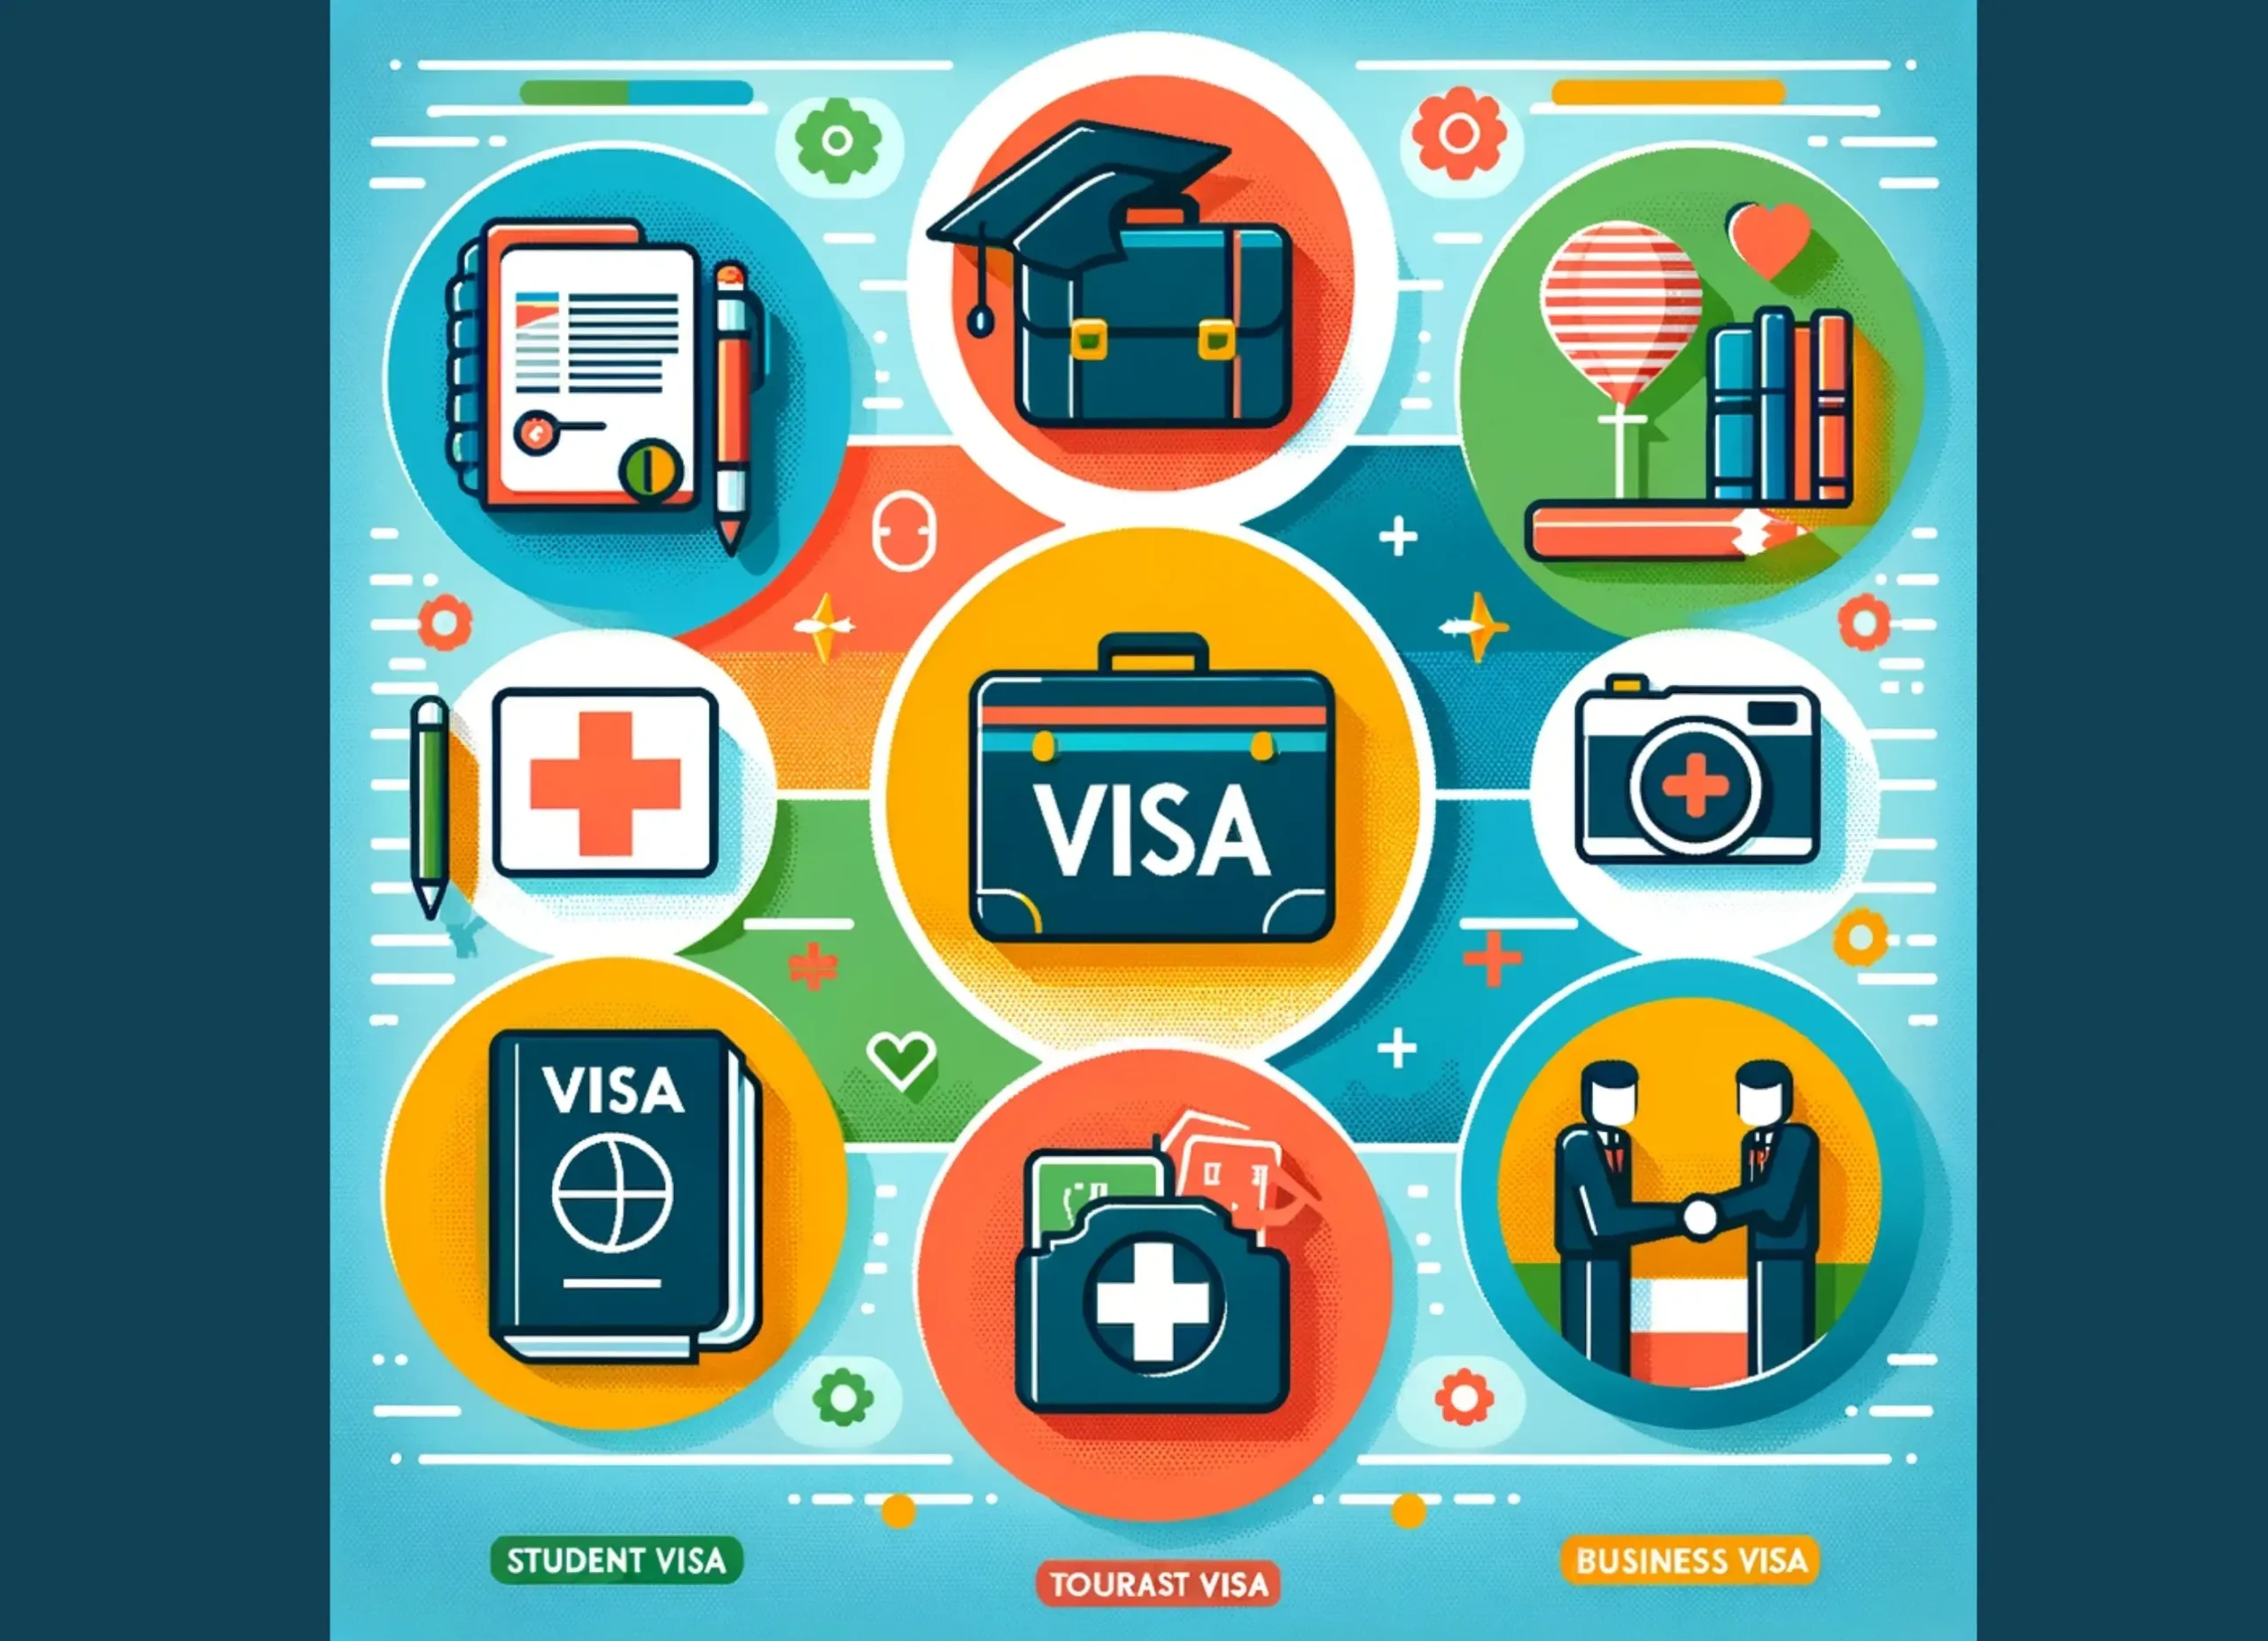 Visa and its types